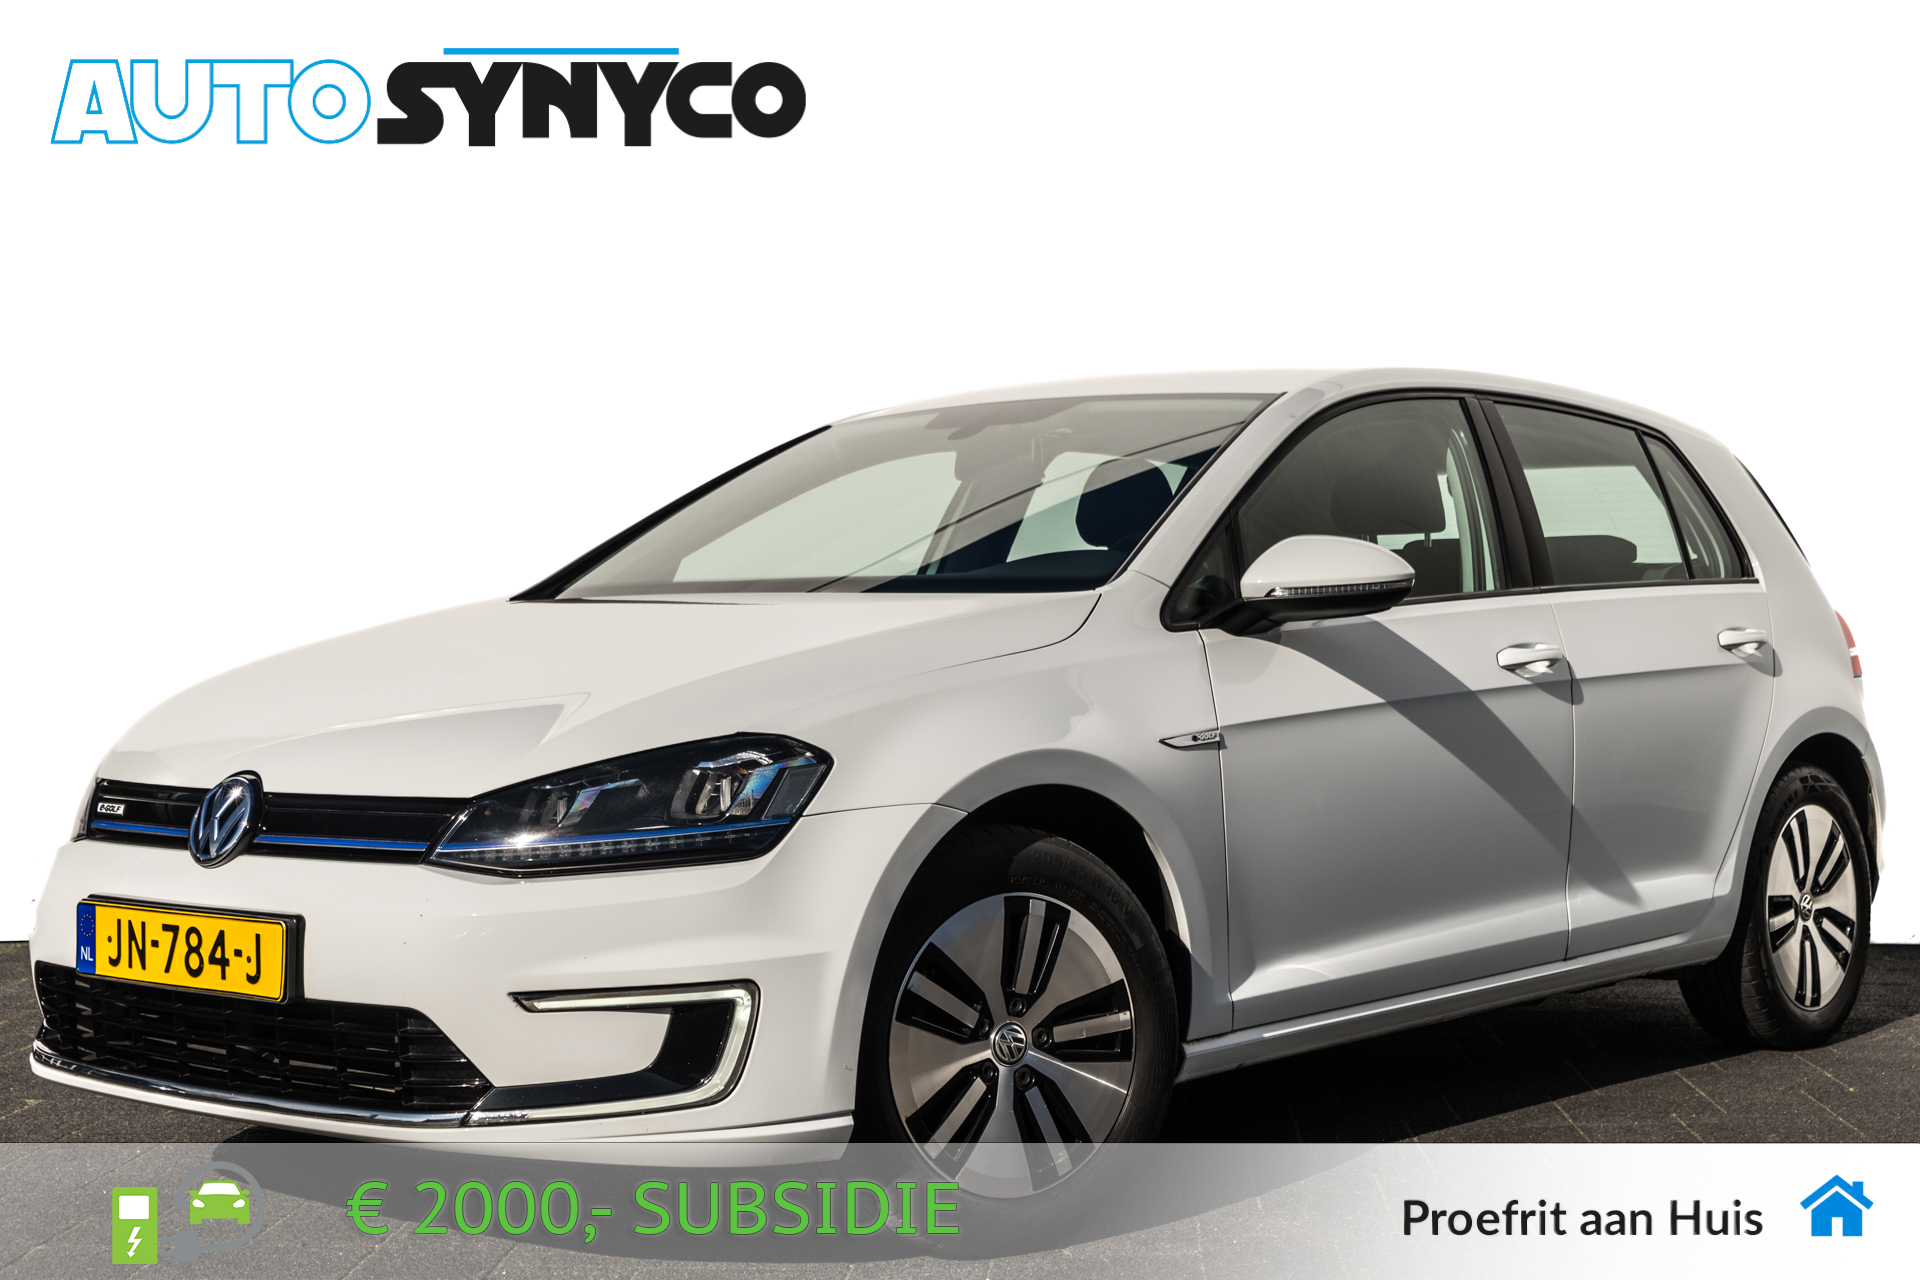 Volkswagen Golf e-Golf 24 Kwh | LED | 2.000,- Subsidie | Navigatie | Climate Control